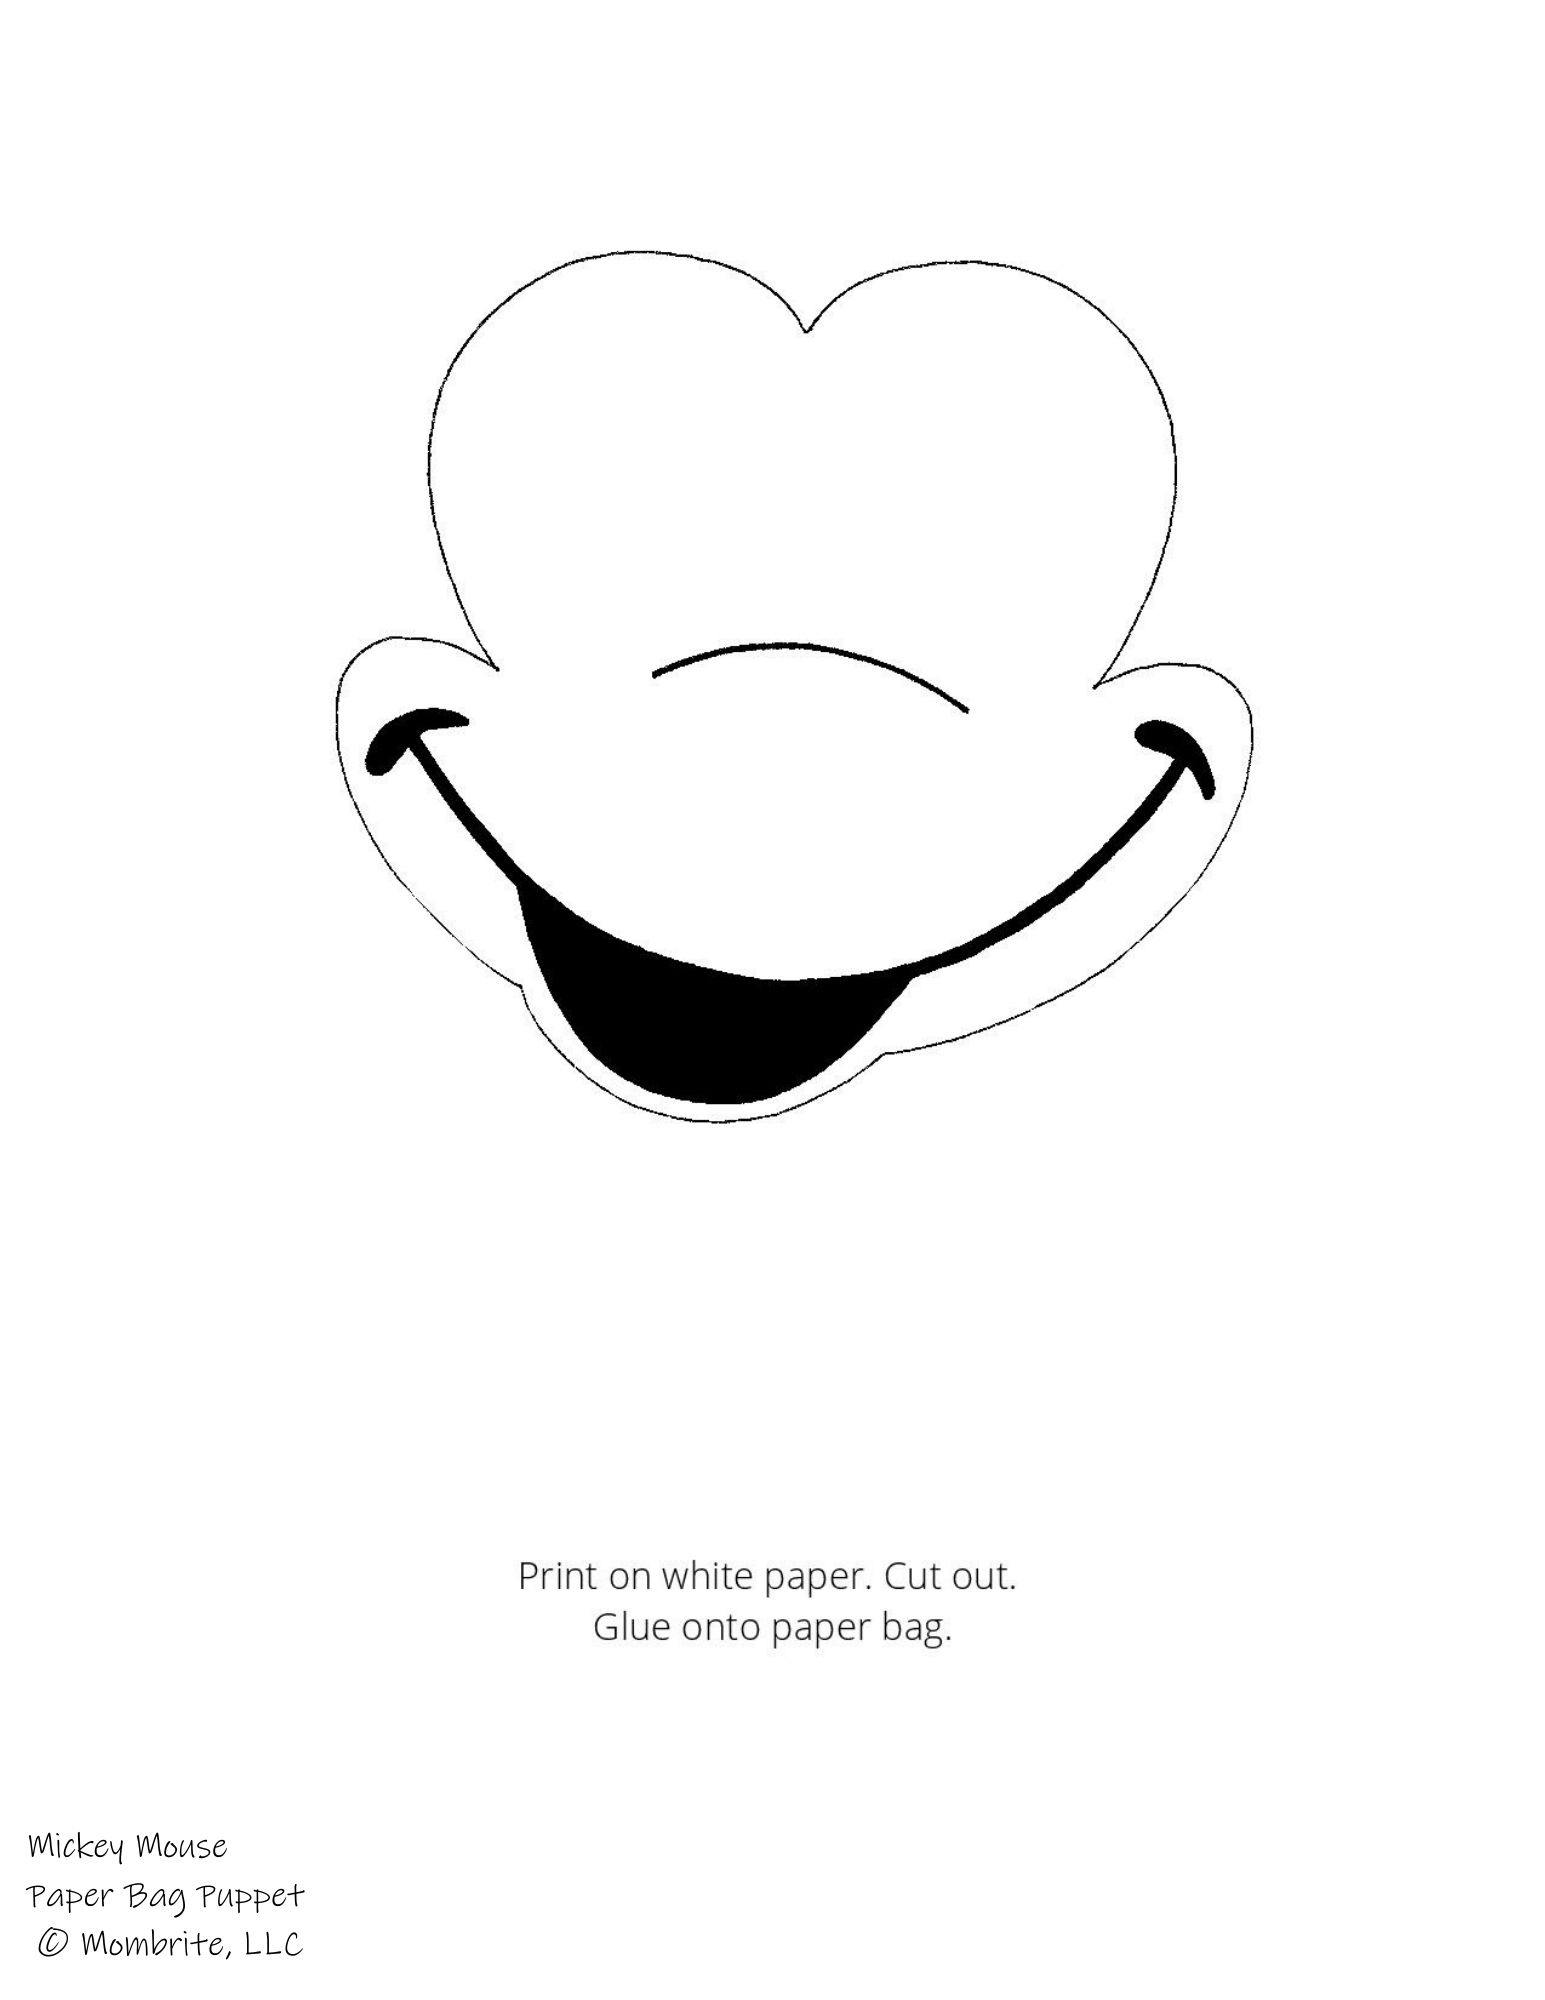 free-printable-paper-bag-bunny-puppet-templates-printable-templates-free